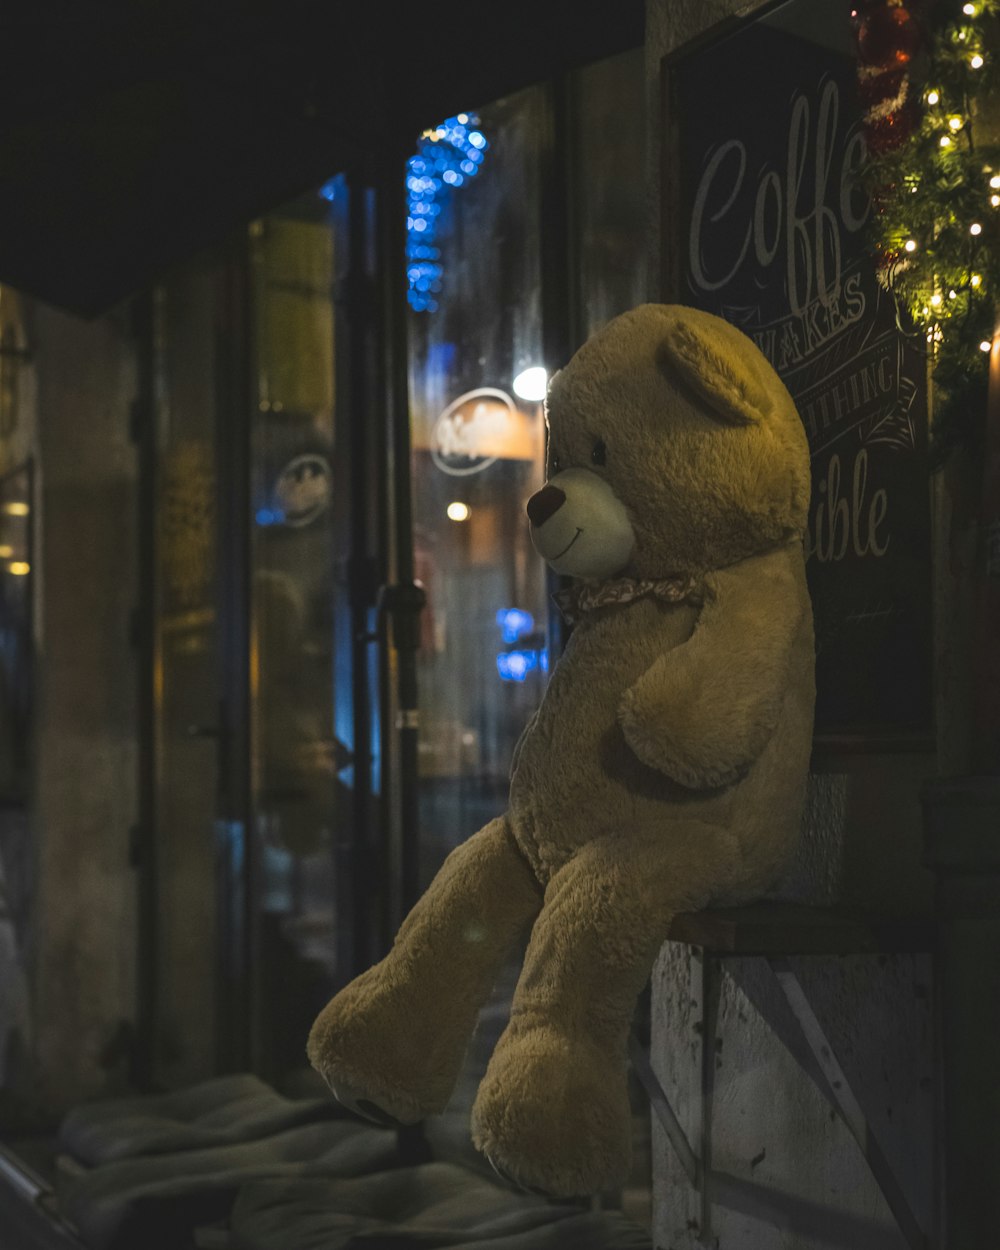 a teddy bear sitting on a ledge in front of a store